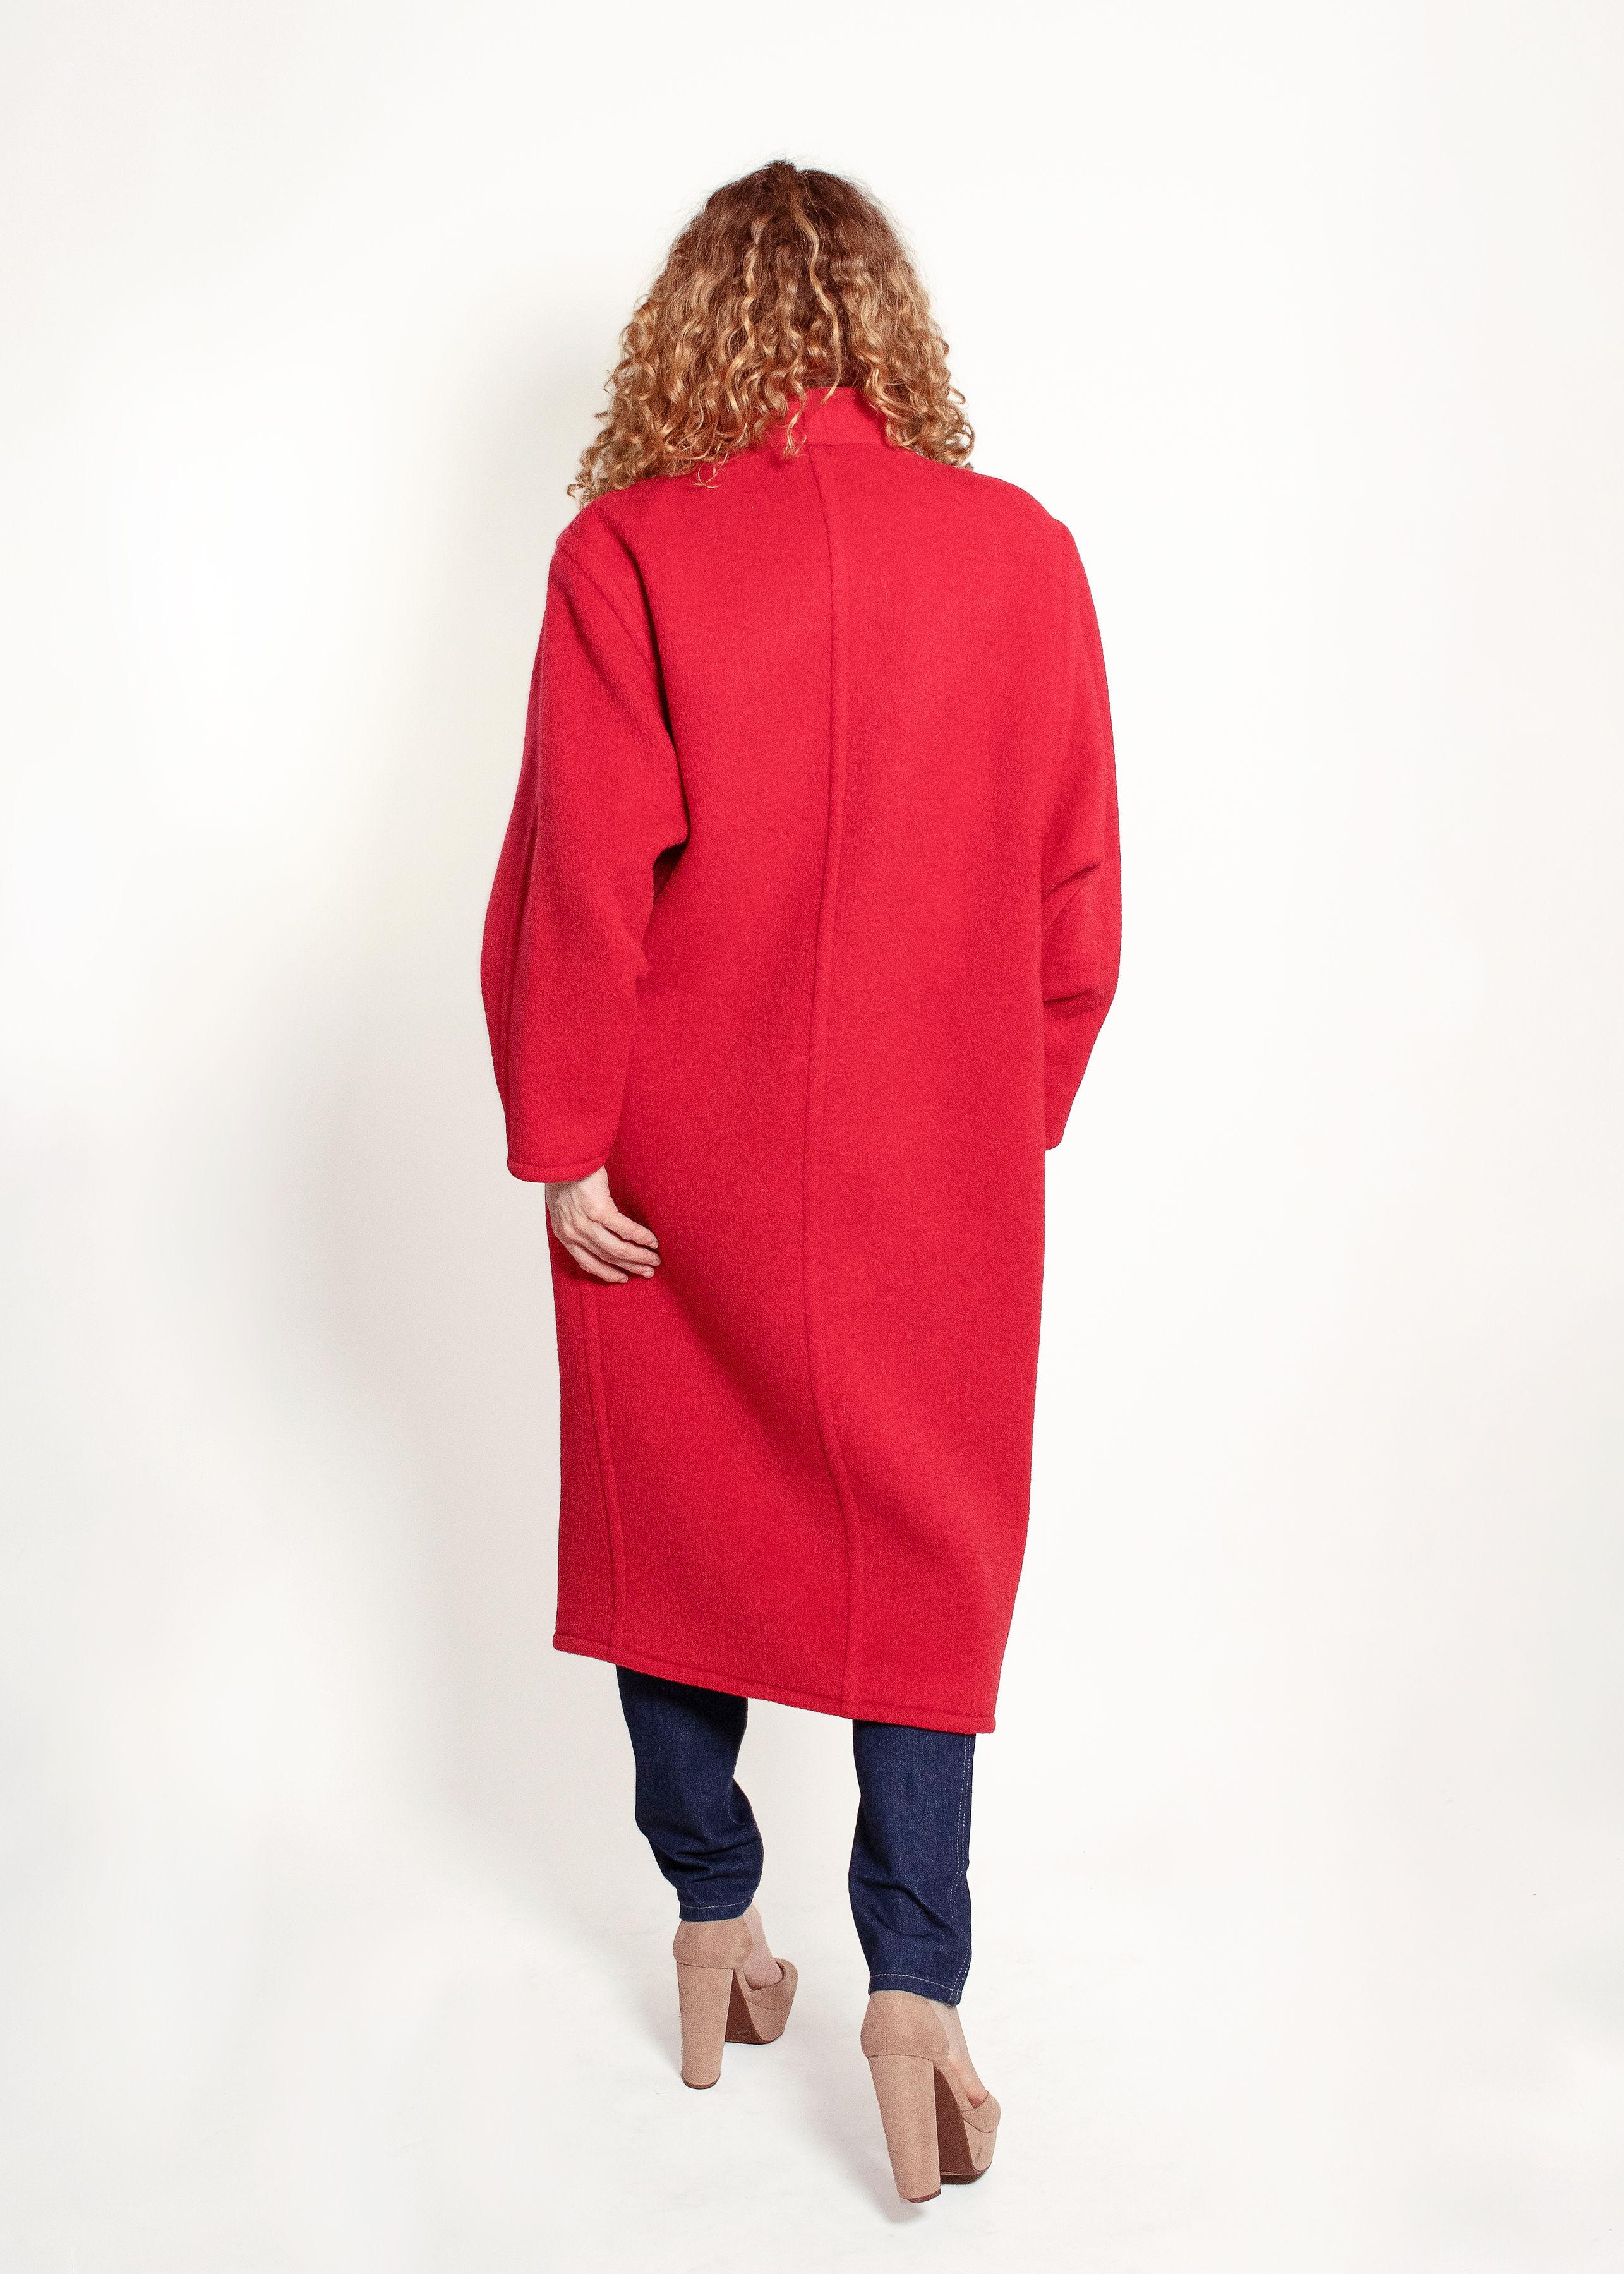 Courreges Red Wool Coat In Good Condition For Sale In Los Angeles, CA